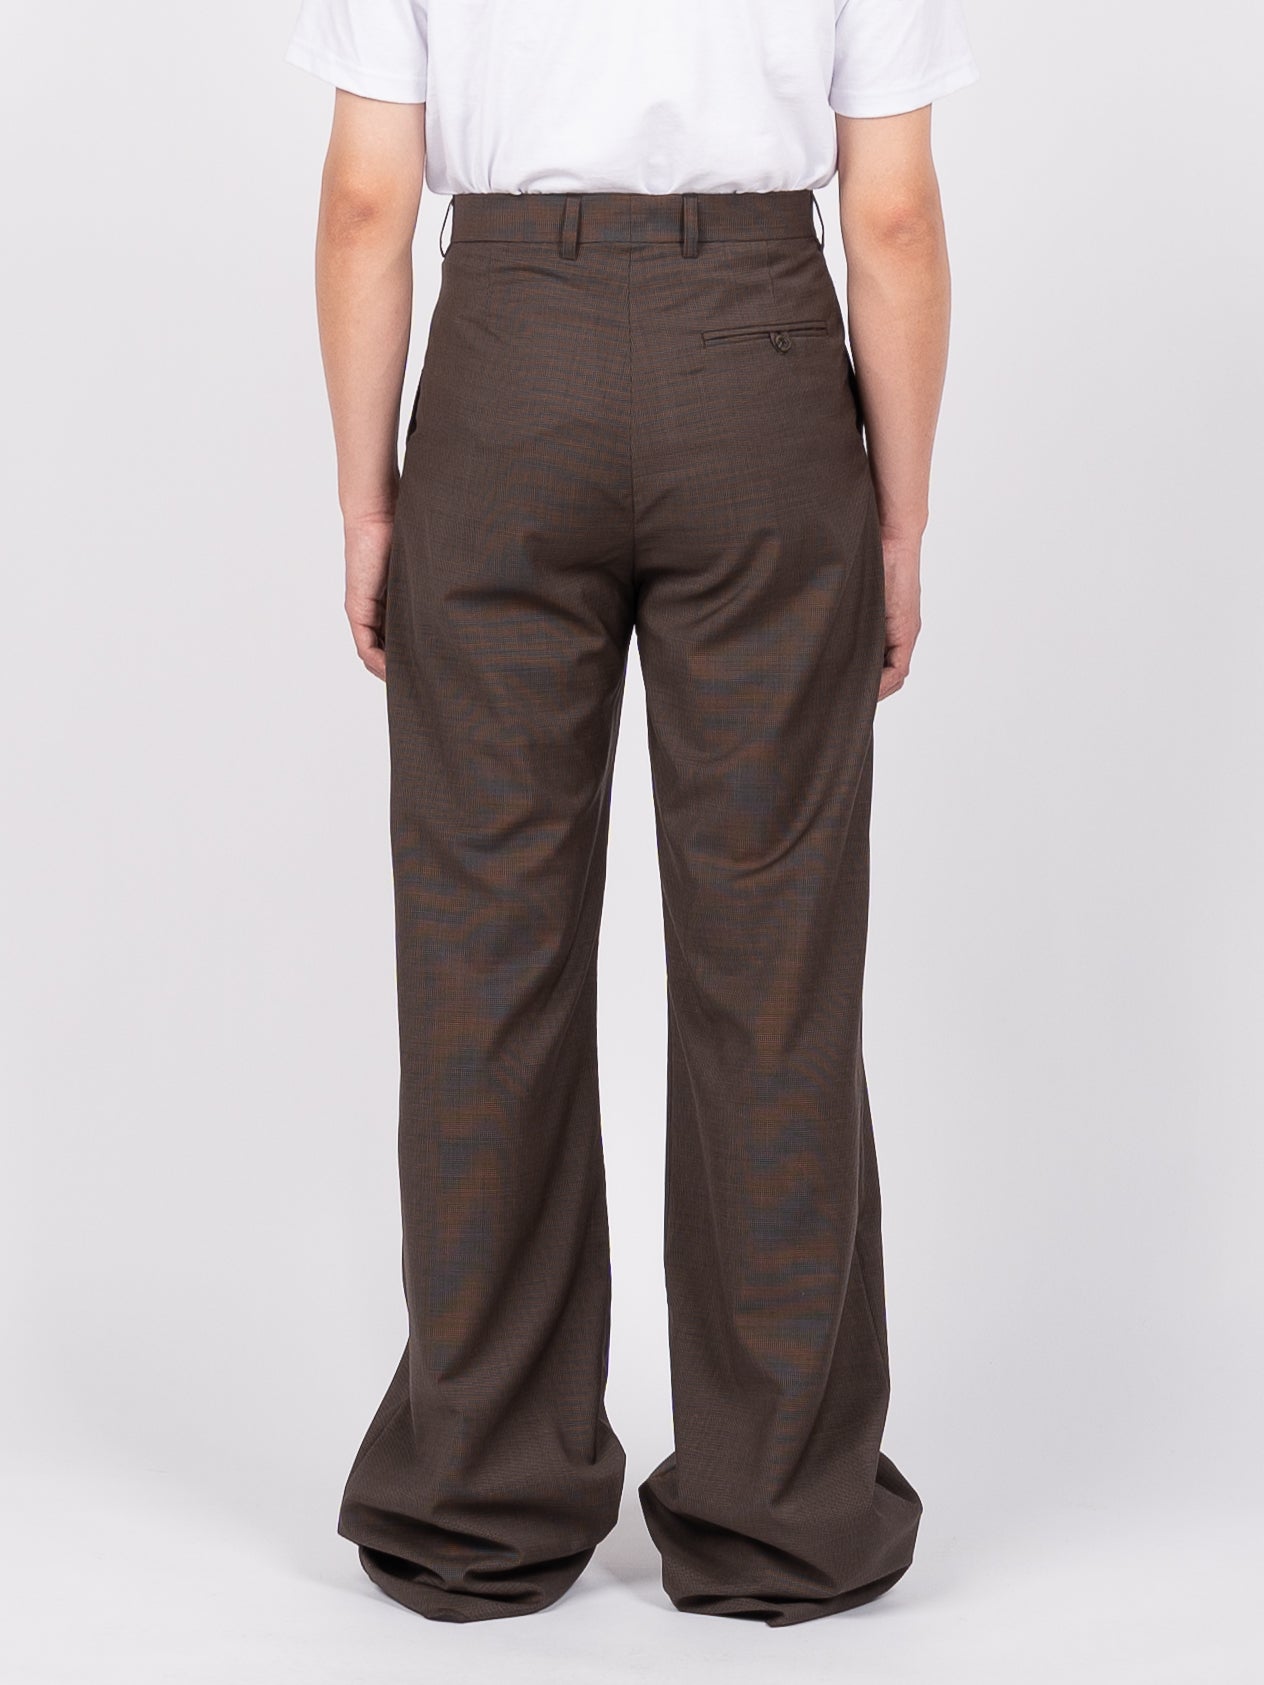 Martine Rose Tailored Extended Wide Leg Trouser (Brown Houndstooth)